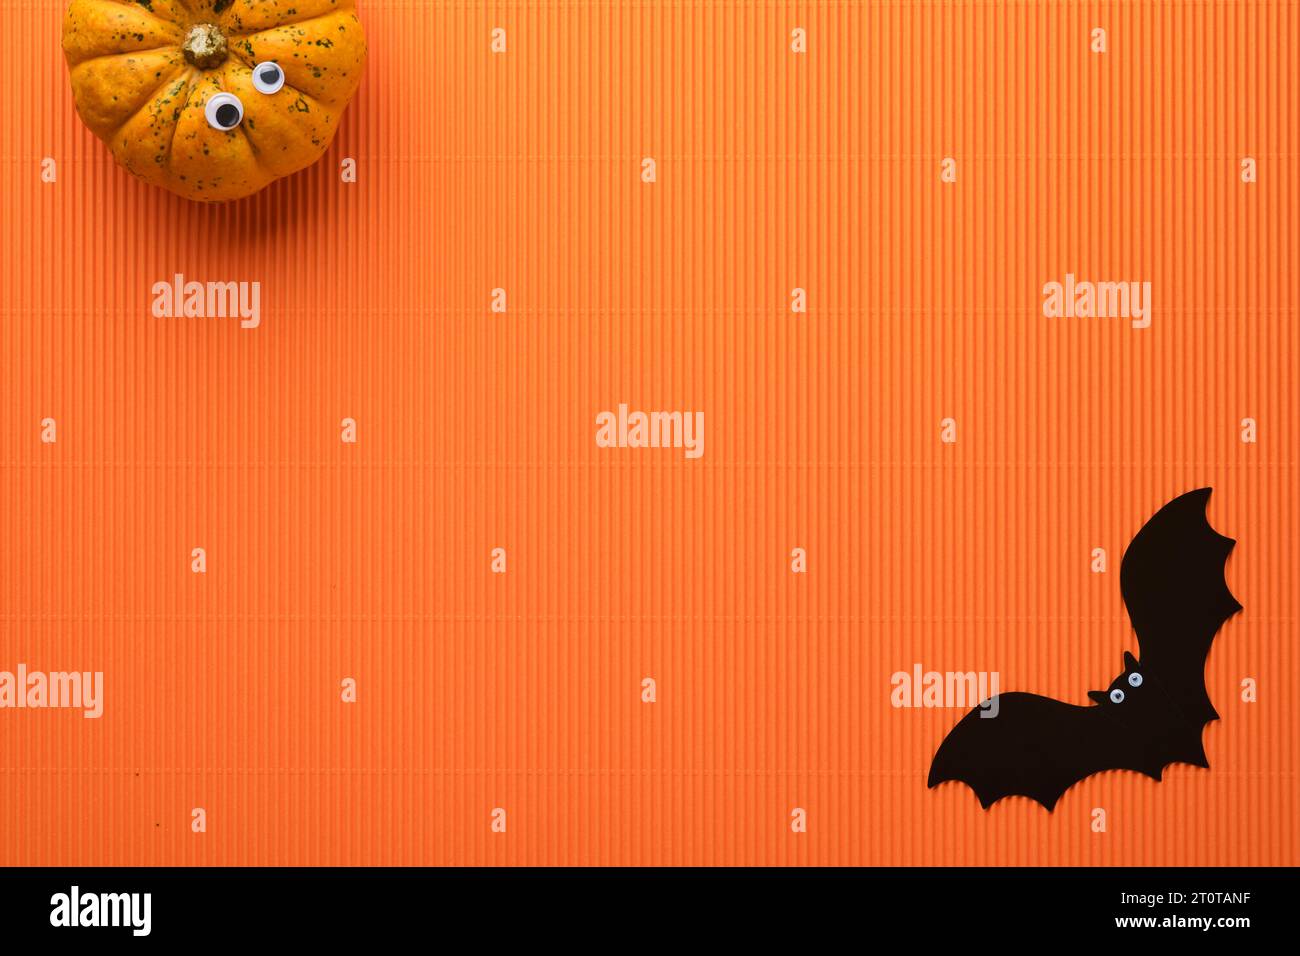 Halloween holiday background. Orange pumpkin, bat with funny eyes, spider, spider web, old leaves and branches from scary forest on orange background. Stock Photo